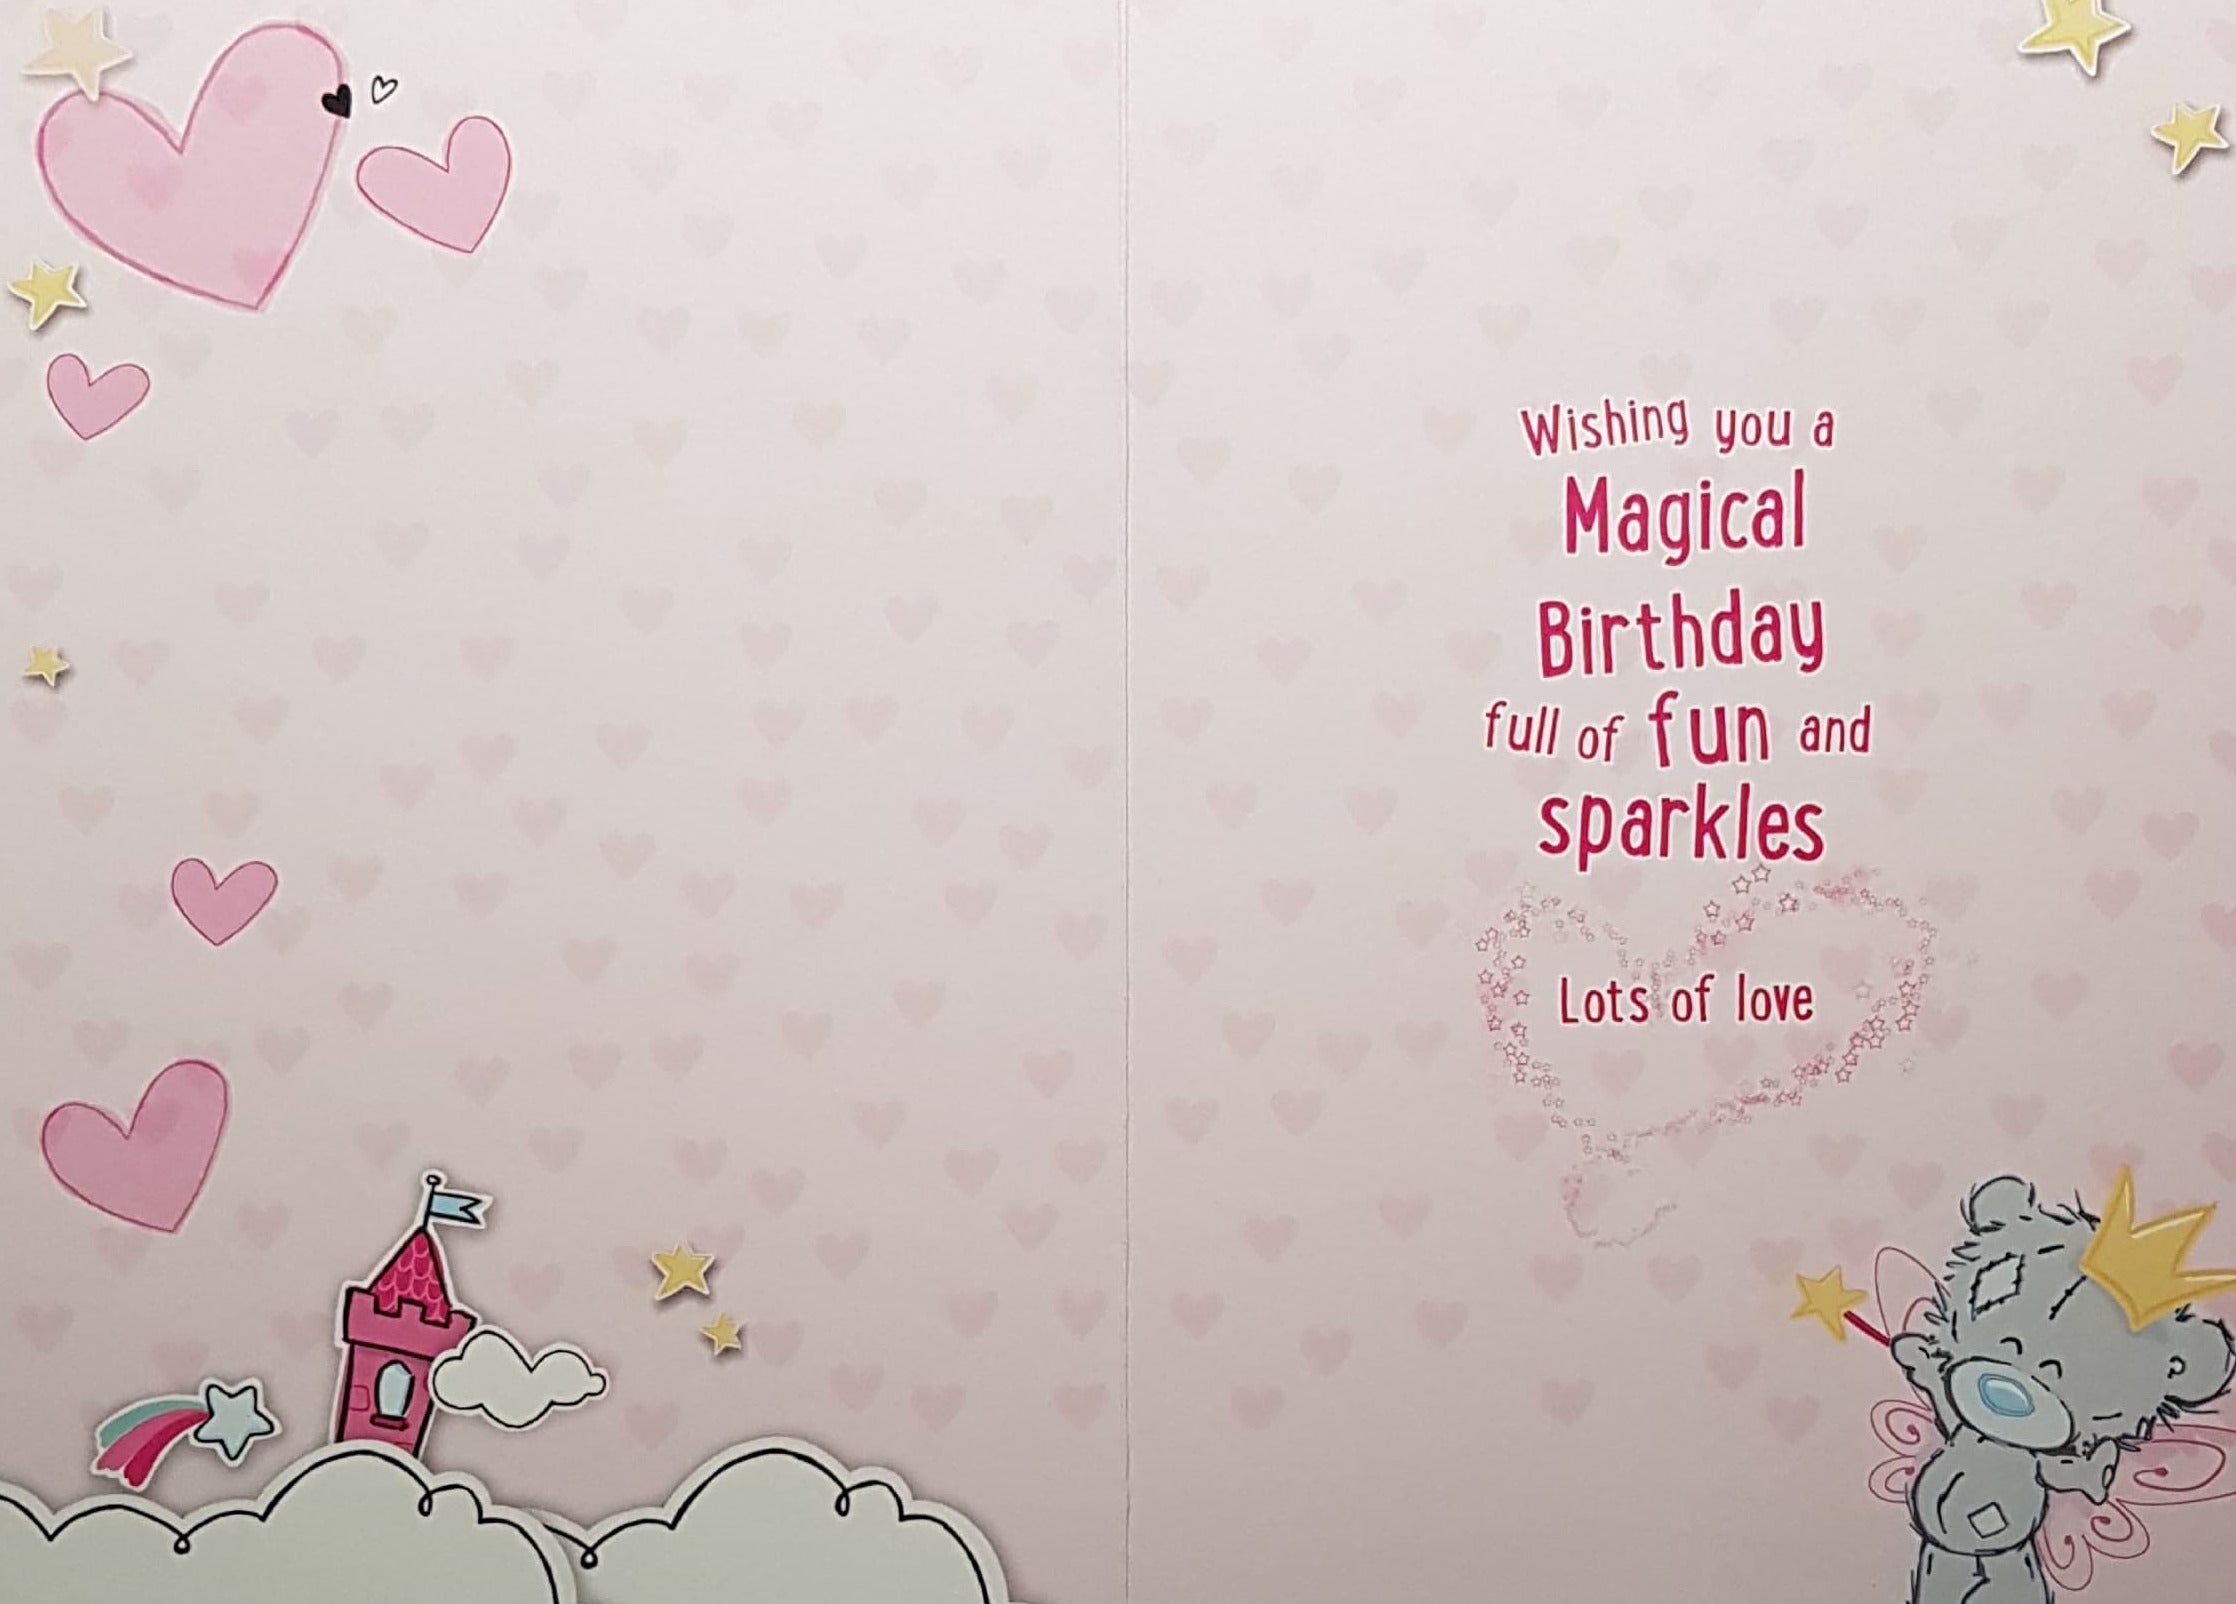 Birthday Card - Daughter / Cutie Fairy Teddy With Pink Wings Holding A Wand